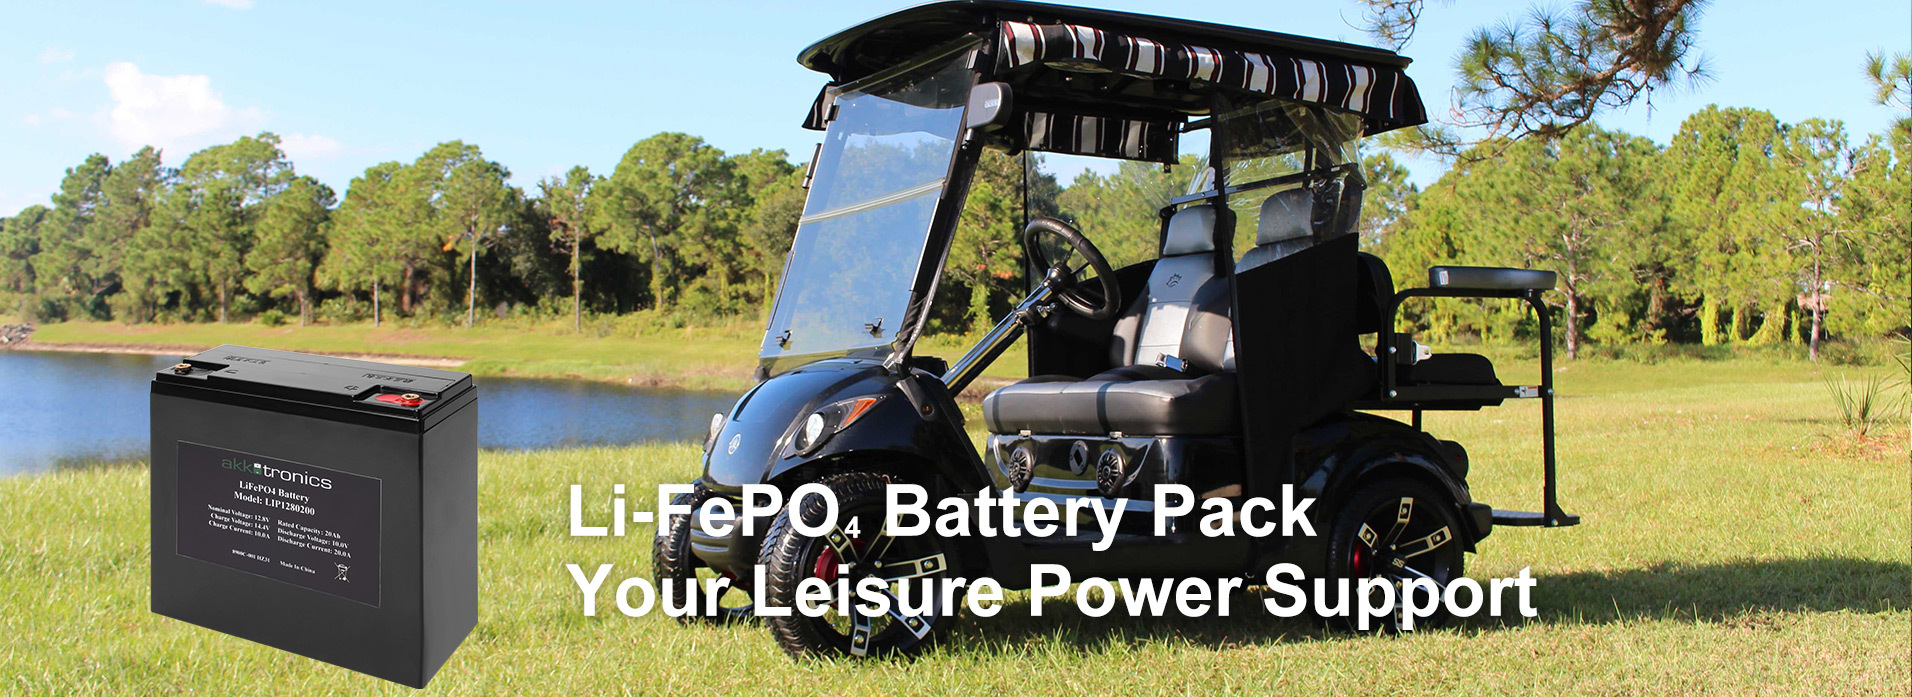 Li-FePO4 Battery Pack Your Leisure Power Support